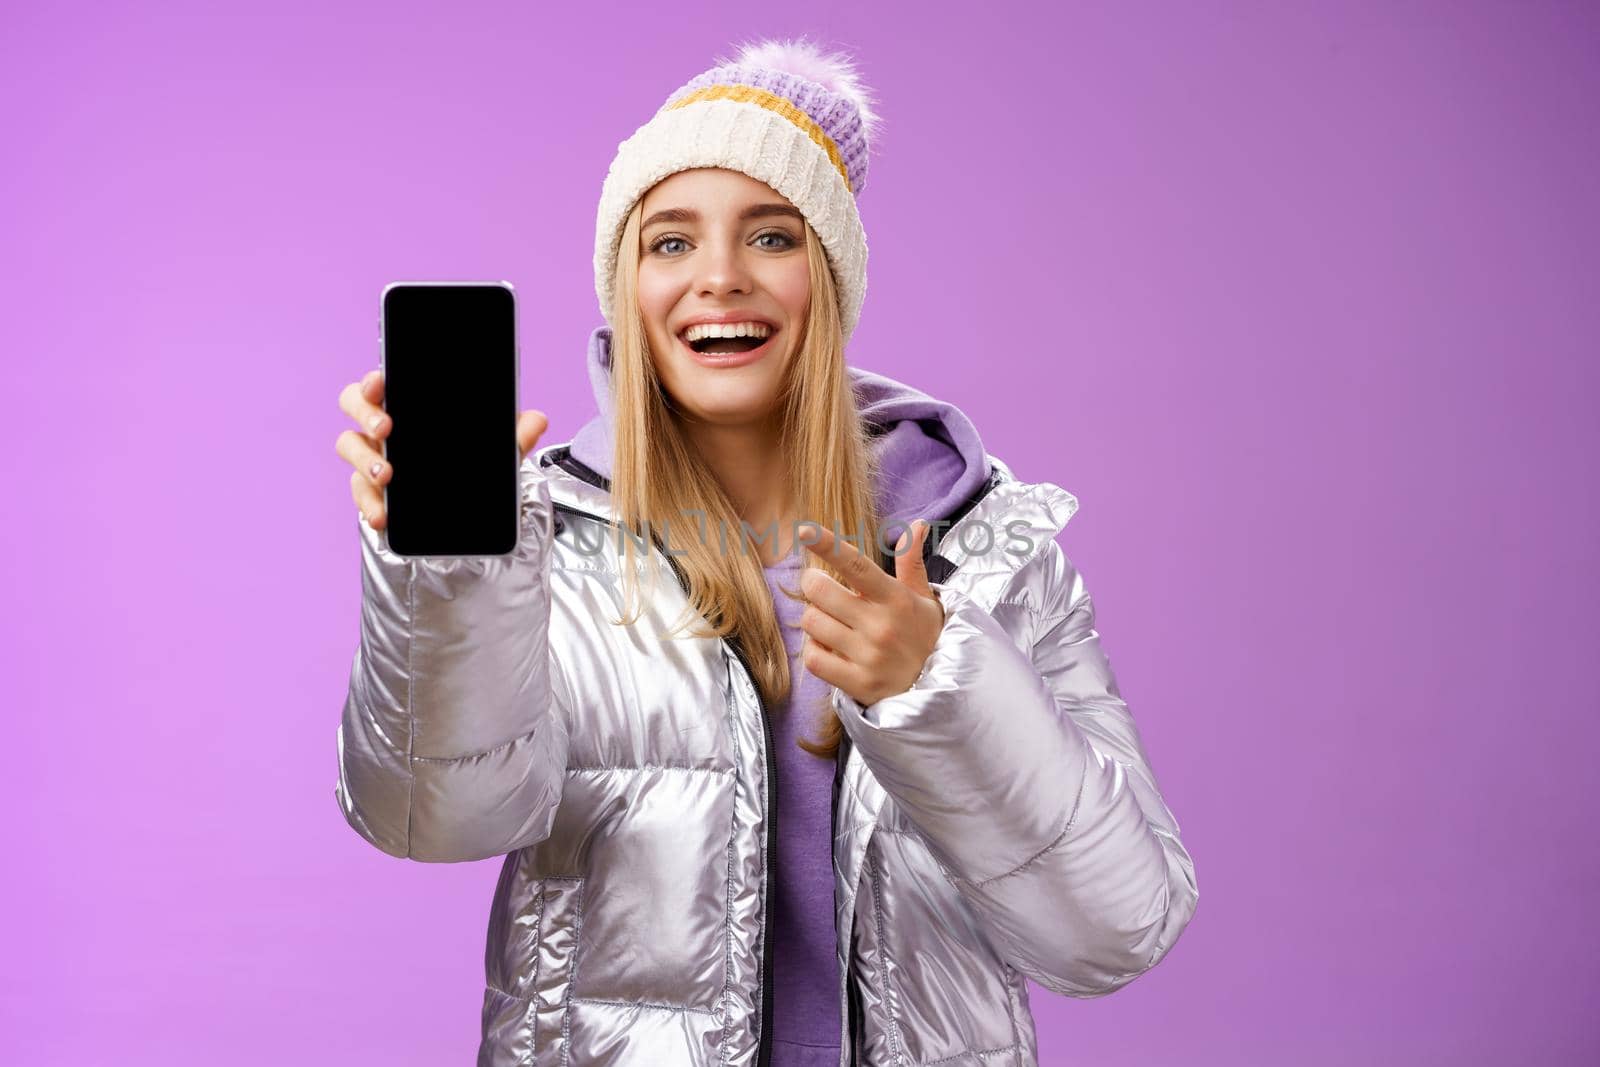 Satisfied amused good-looking blond girl suggest take look smartphone display smiling happily pointing mobile phone delighted talking about awesome new app features, standing purple background.